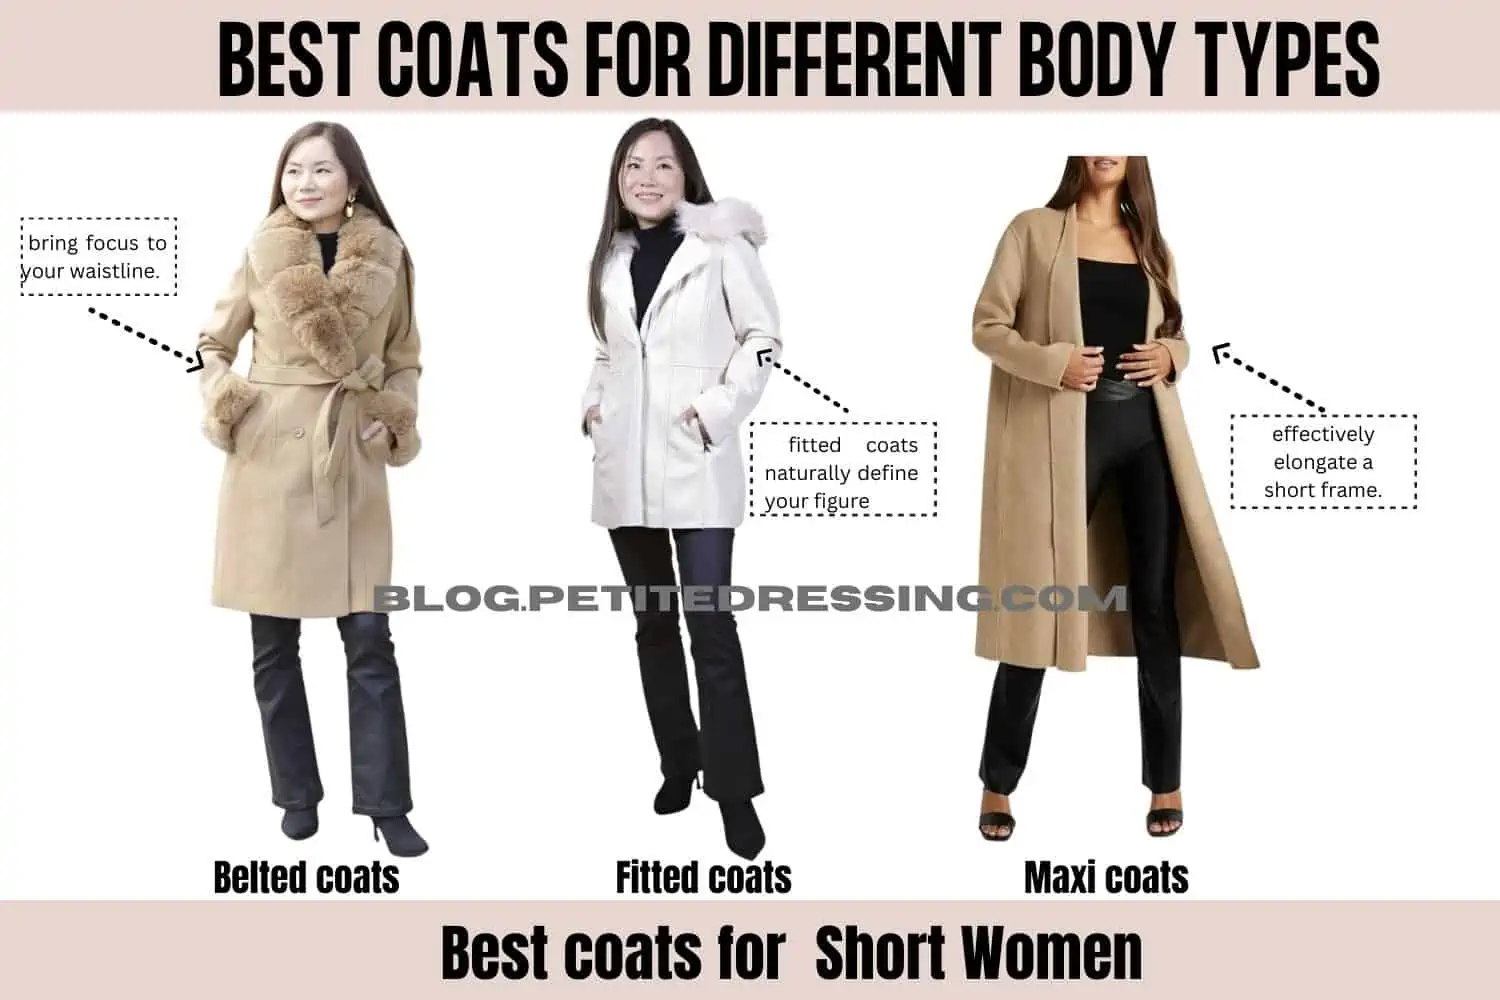 How to Choose the Best Coats for Different Body Types - Petite